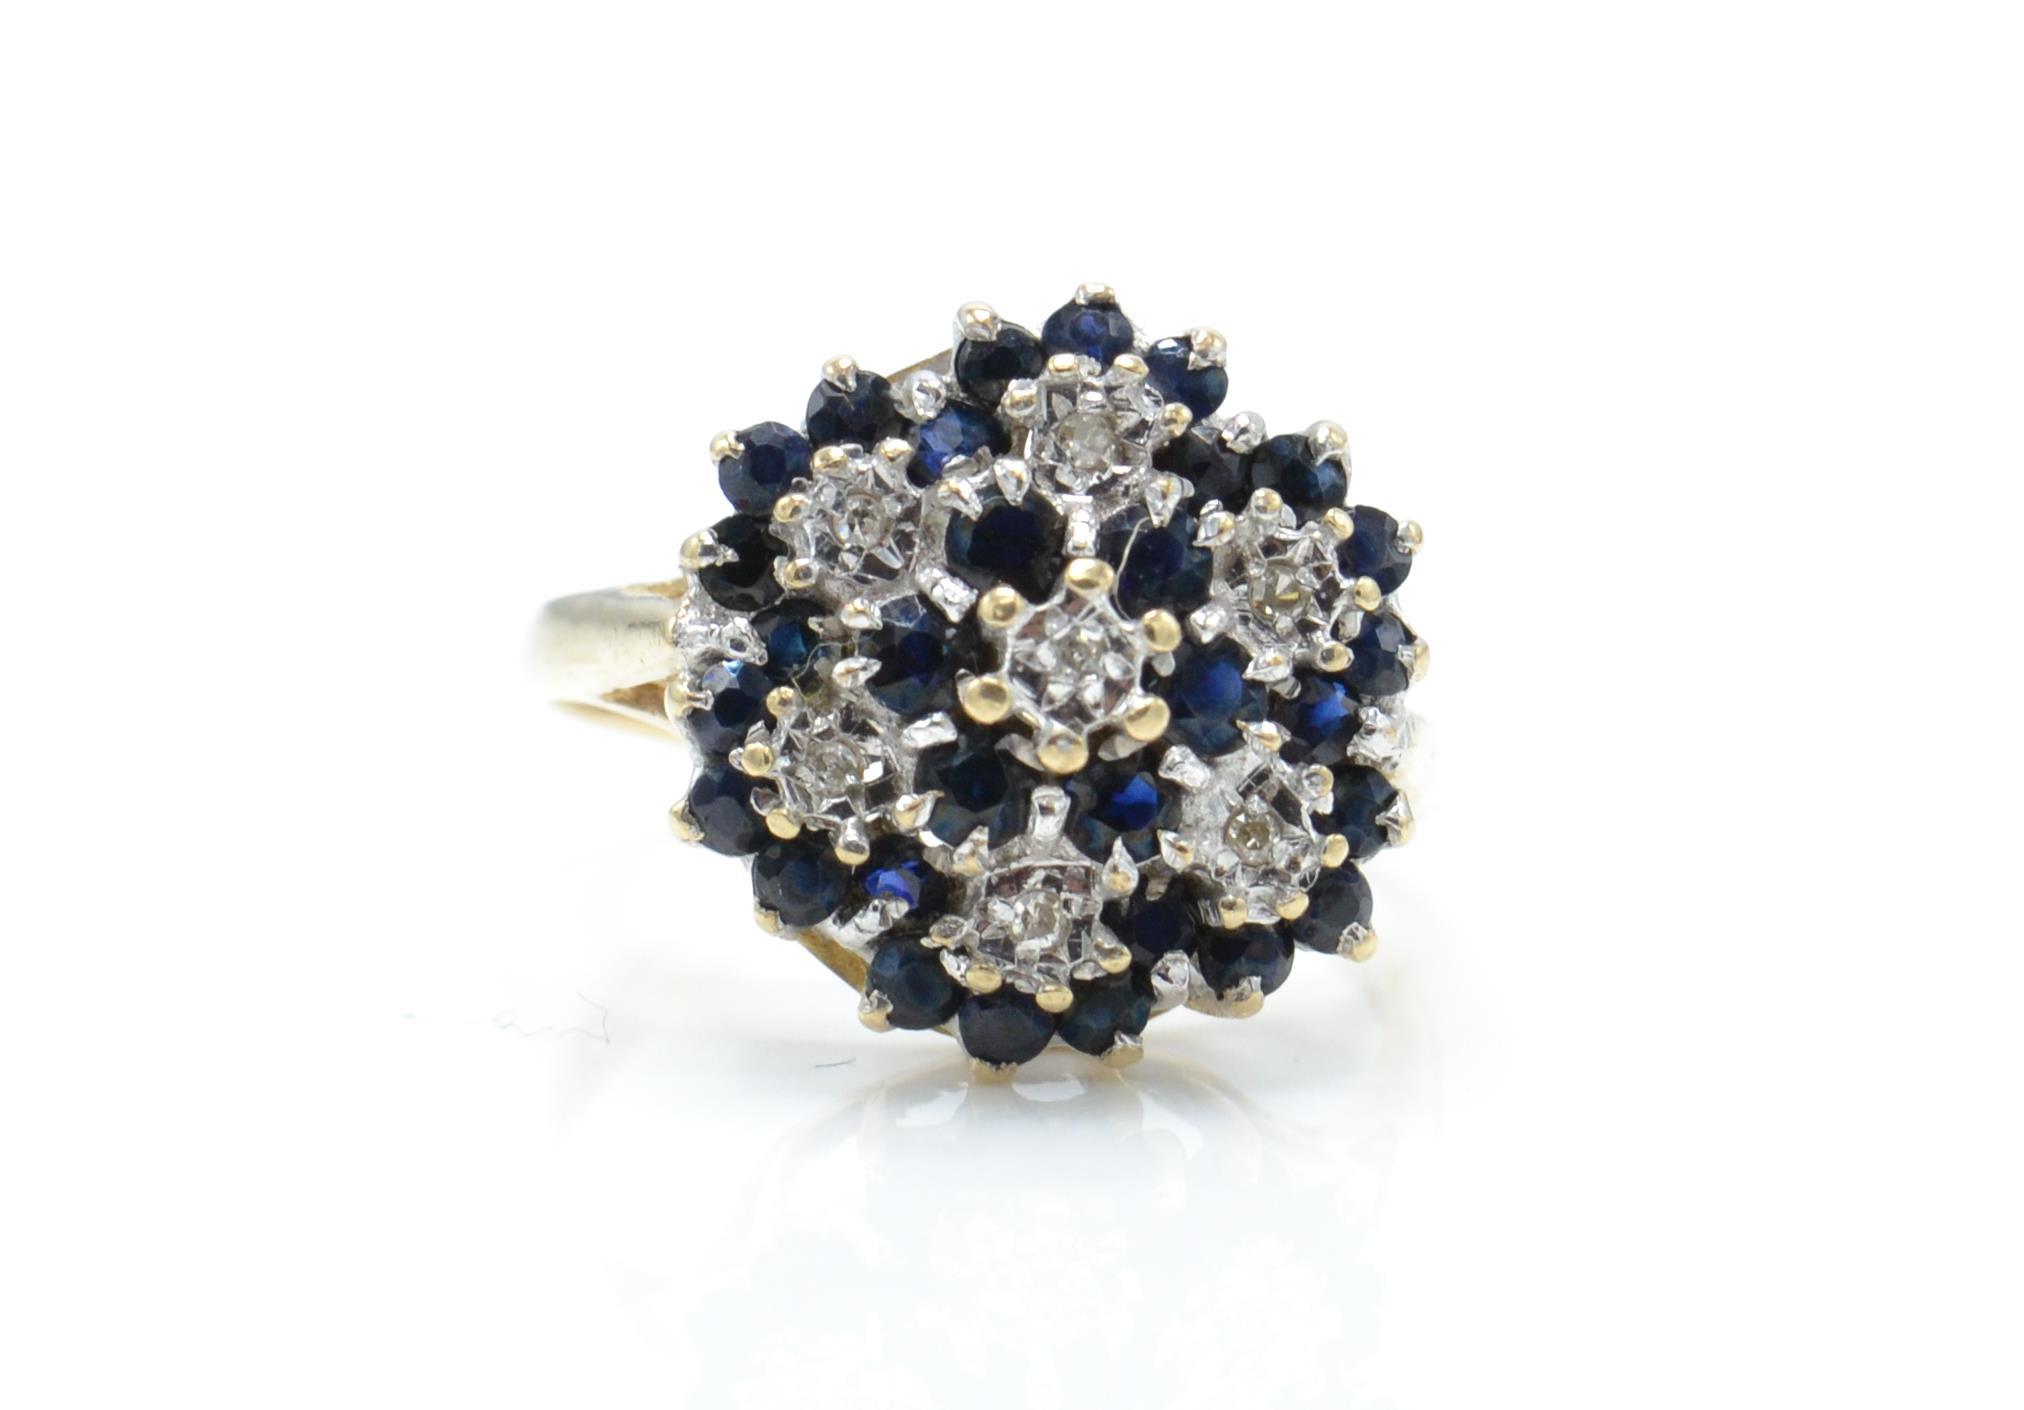 A hallmarked 9ct gold sapphire and diamond cluster ring.